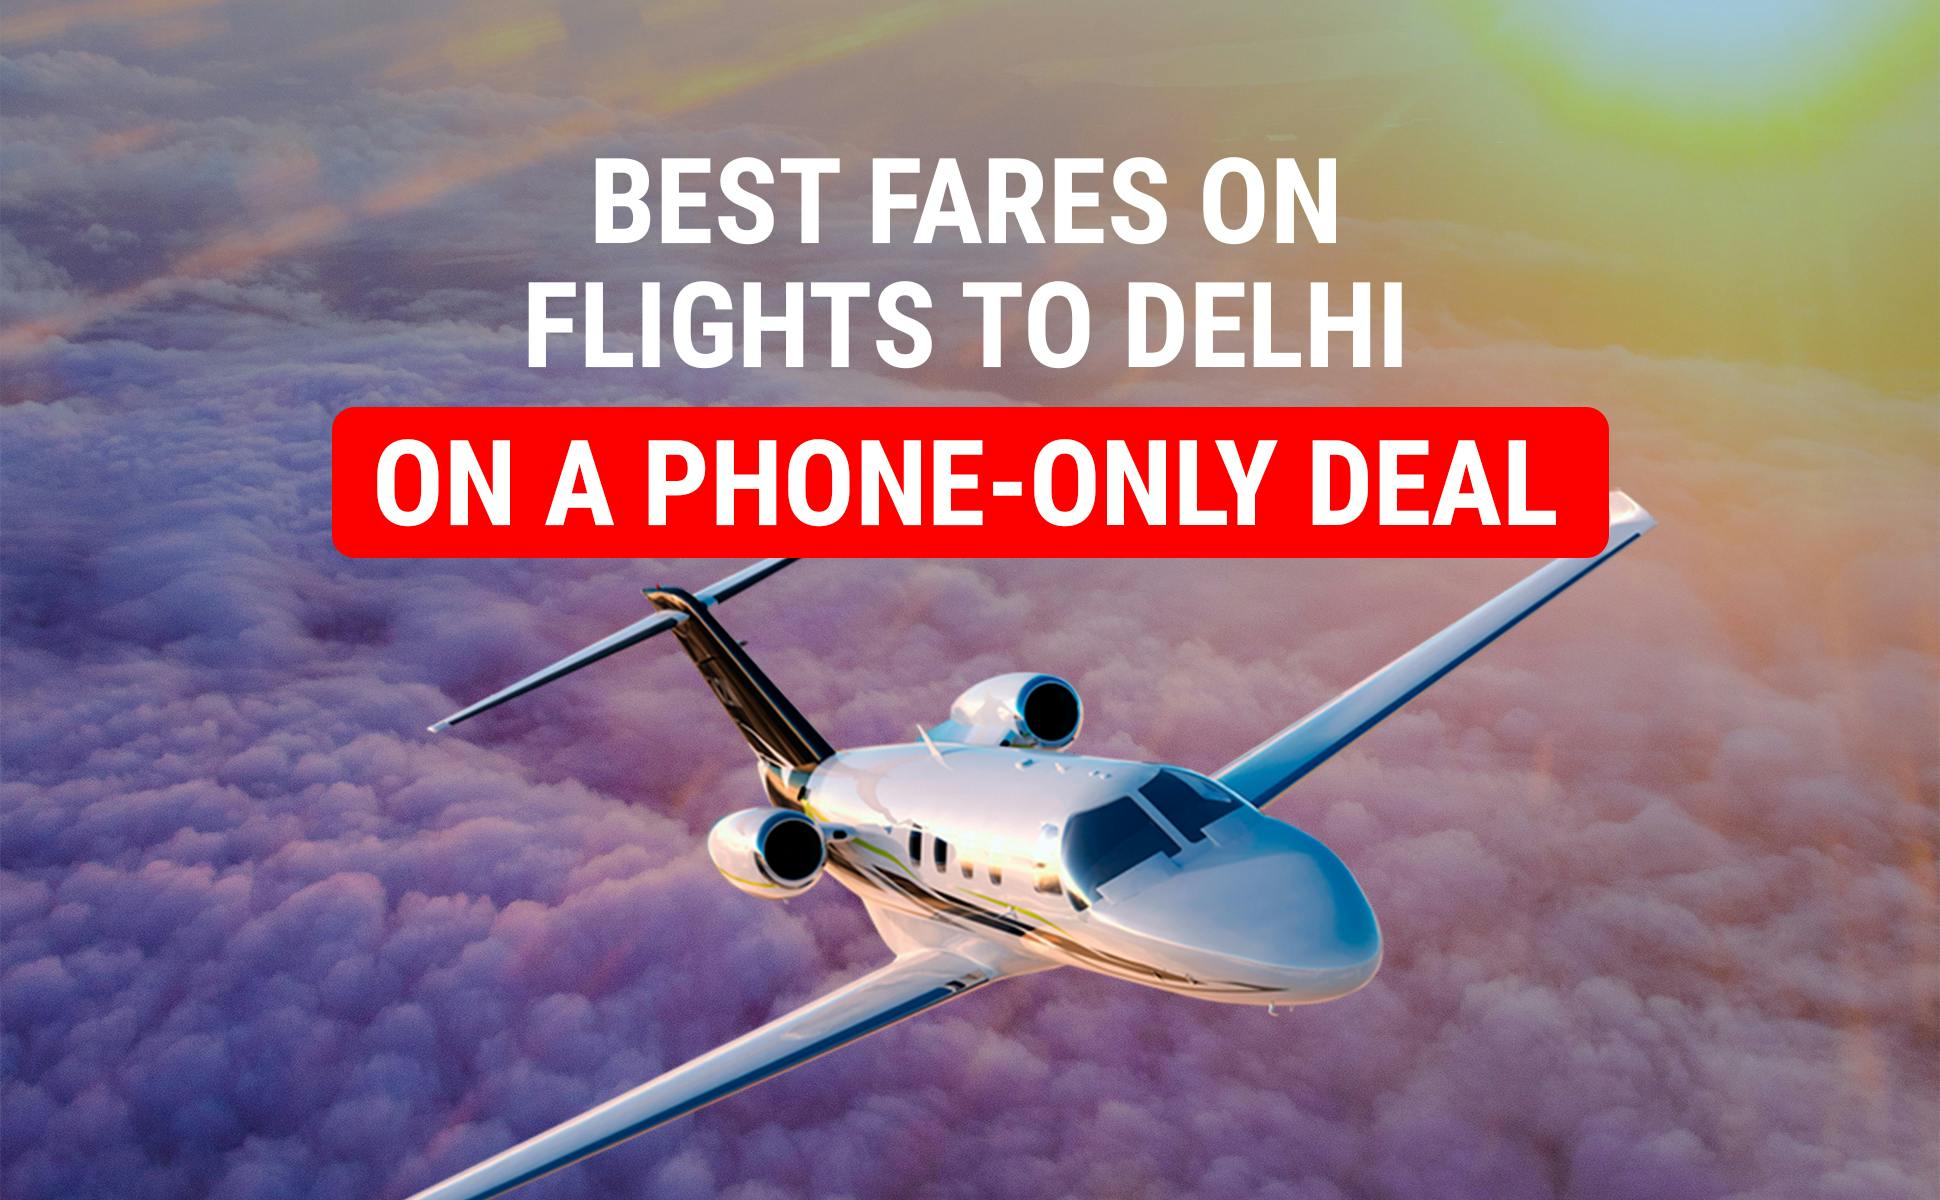 Get the Best Fares on Flights to Delhi on a Phone-Only Deal